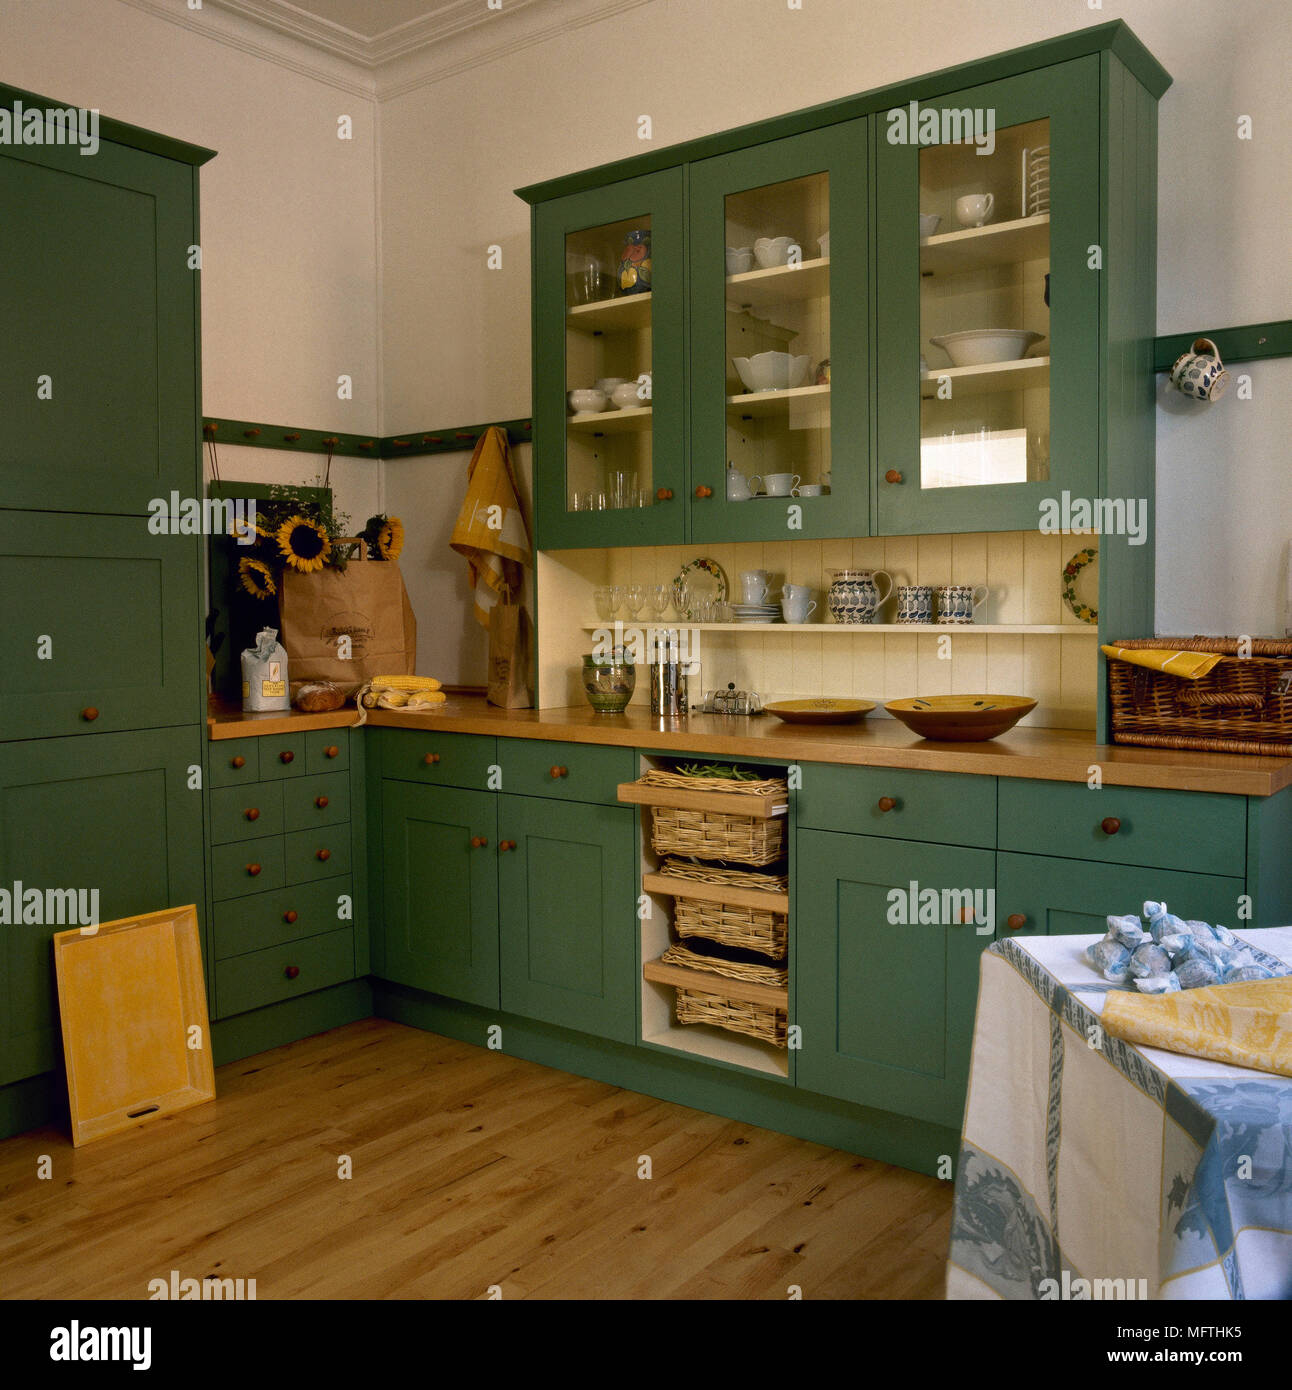 https://c8.alamy.com/comp/MFTHK5/modern-country-style-kitchen-with-green-painted-cabinets-wood-countertops-and-a-wood-floor-MFTHK5.jpg